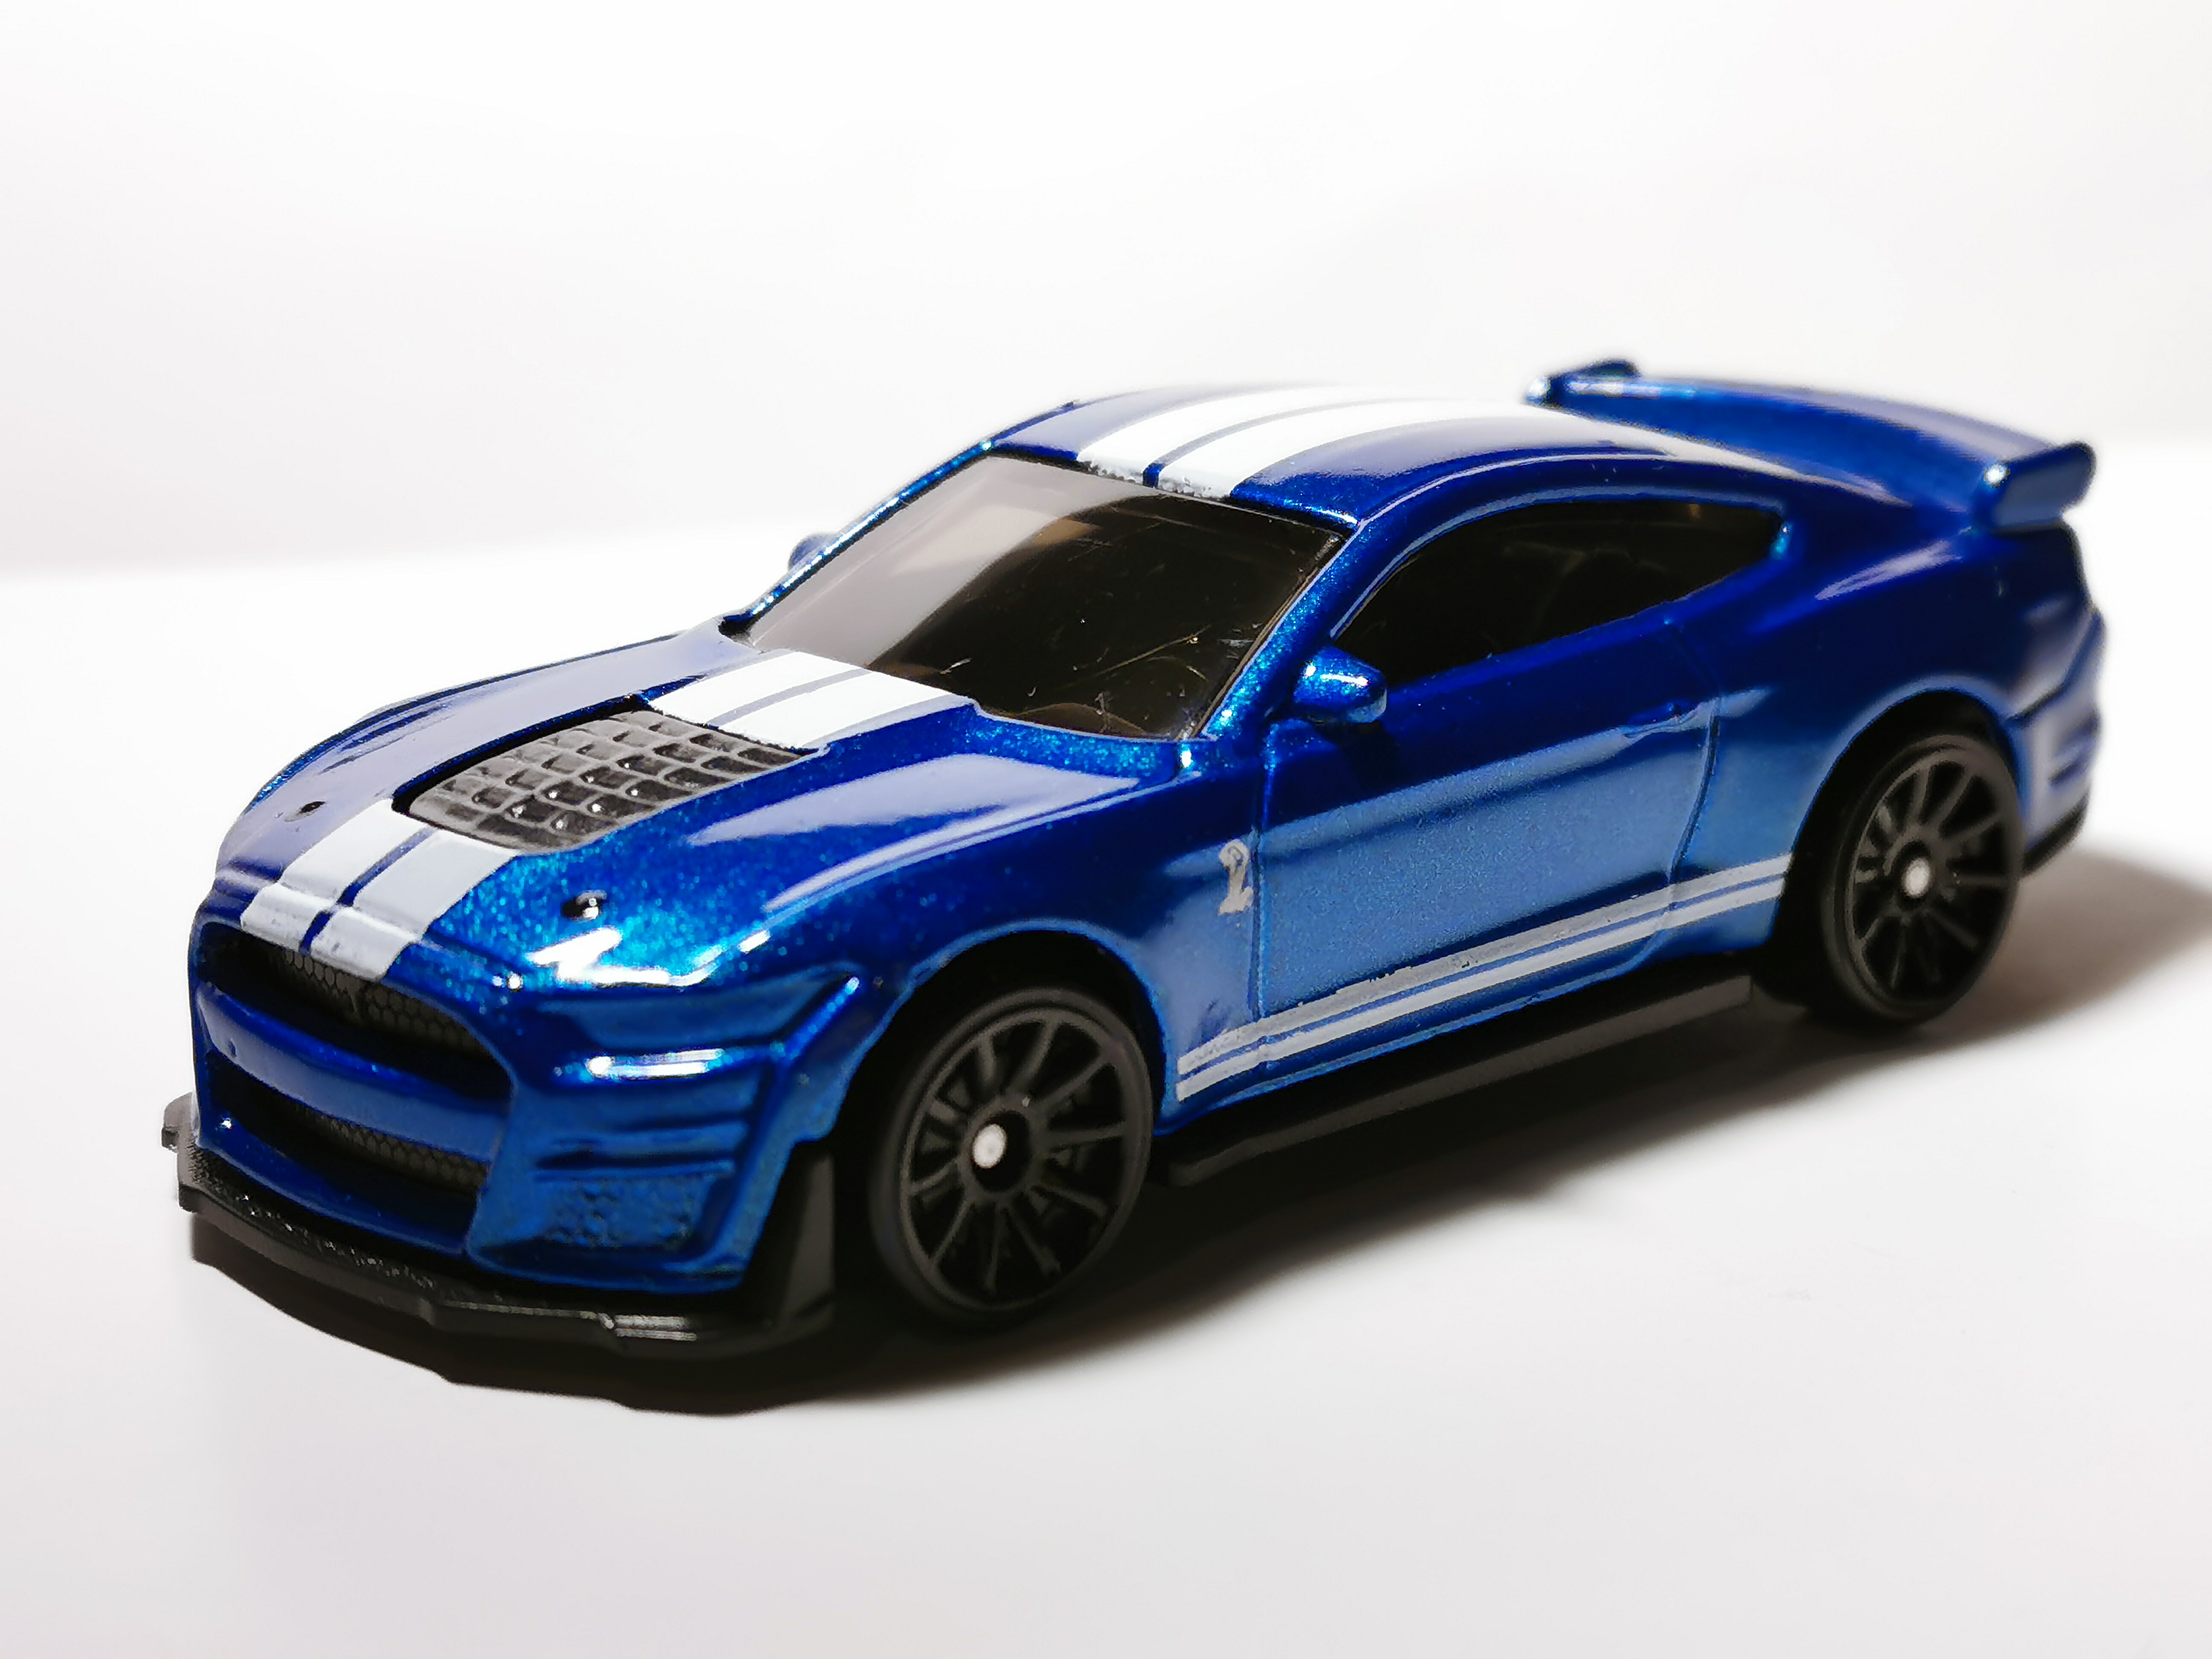 Hot Wheels New For 2020 Muscle Mania #248 2020 Ford Mustang Shelby GT500 Blue